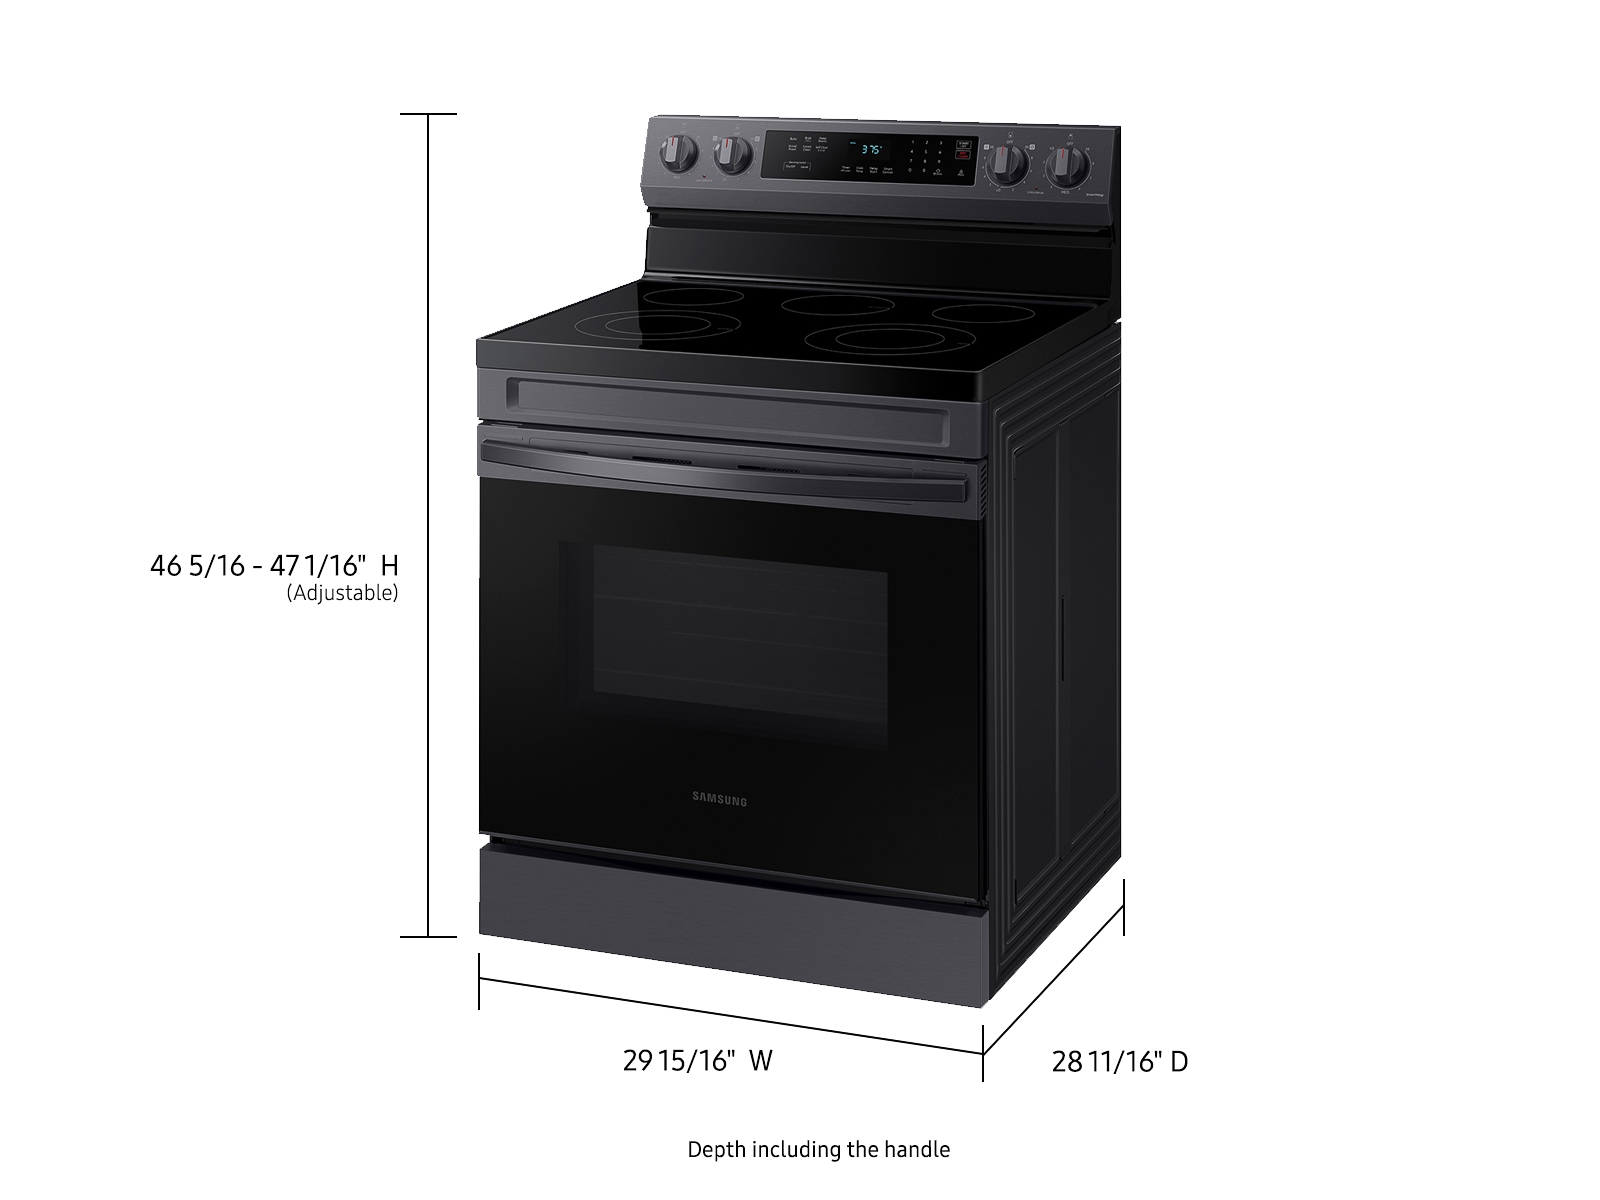 Samsung 6.3 Cu. ft. Stainless Steel Smart Freestanding Electric Range with Rapid Boil & Self Clean